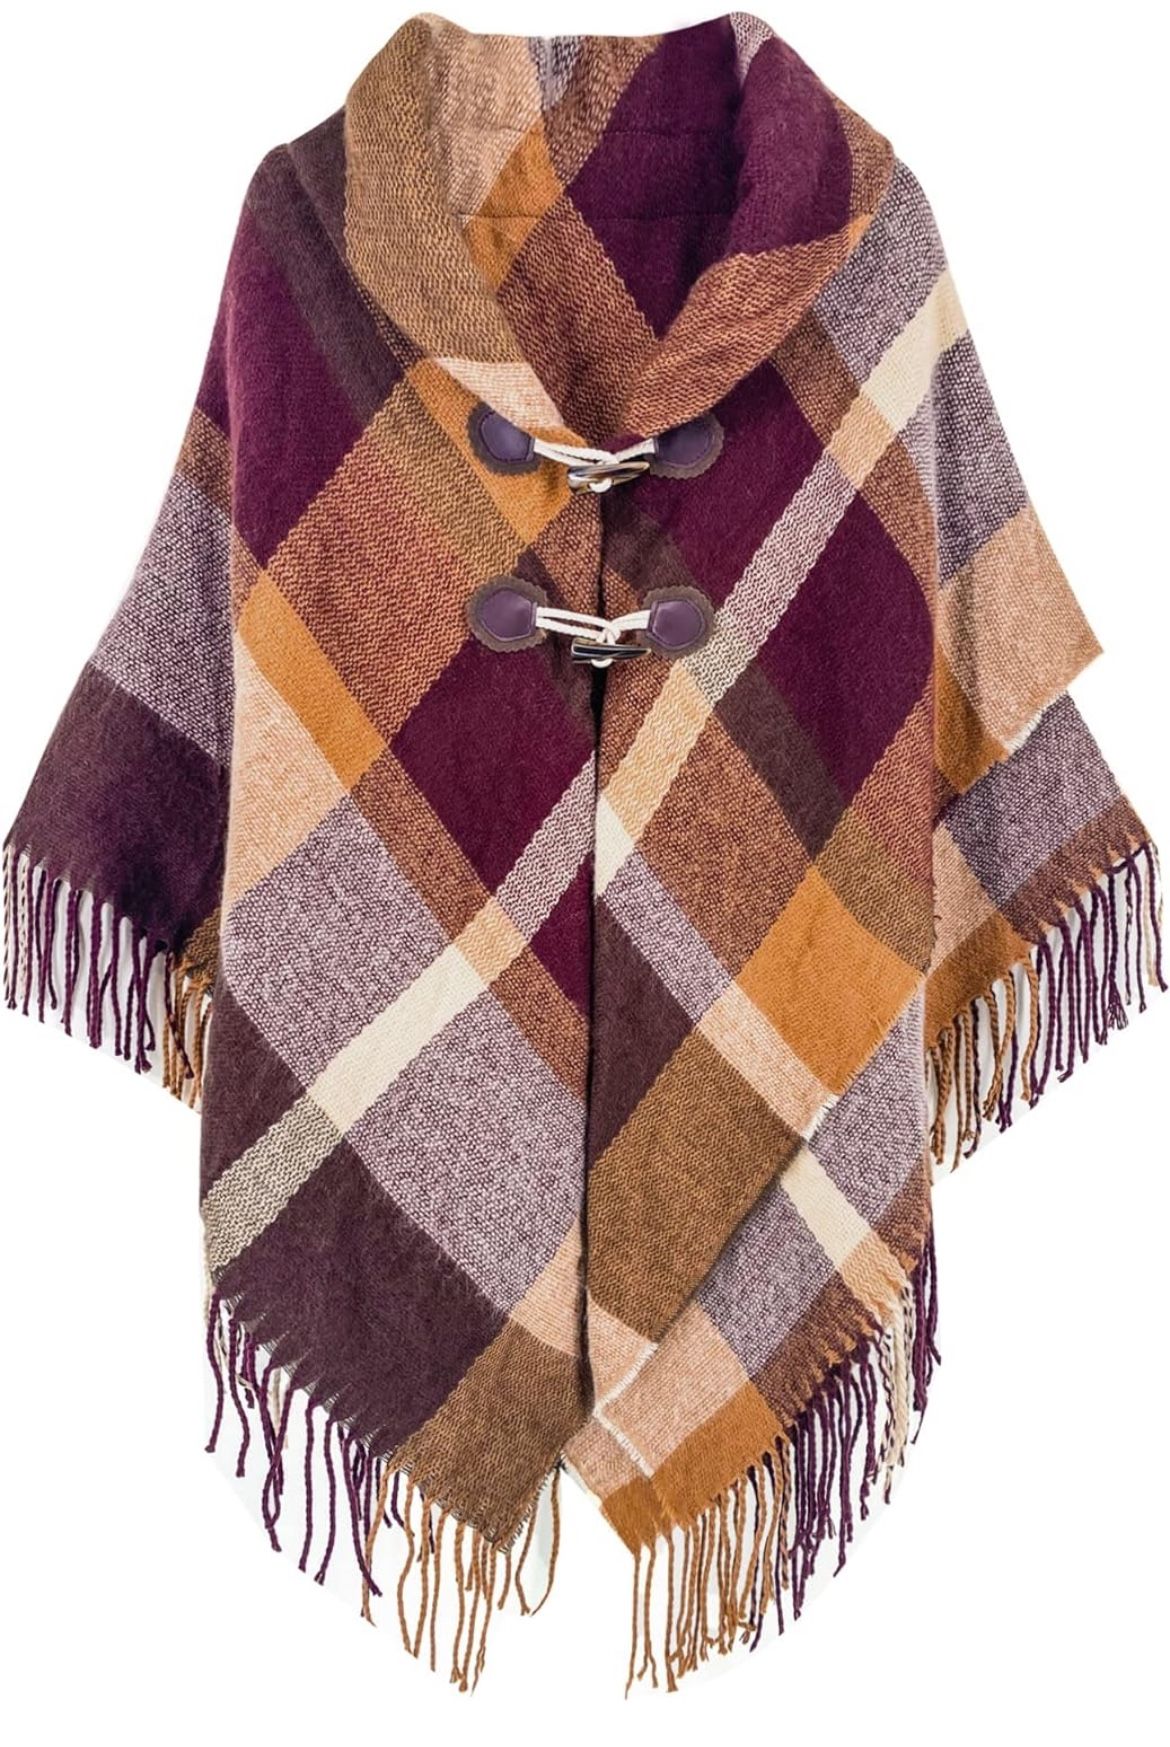 Moss Rose Women's Travel Plaid Shawl Wrap Open Front Poncho Cape for Fall Winter #284